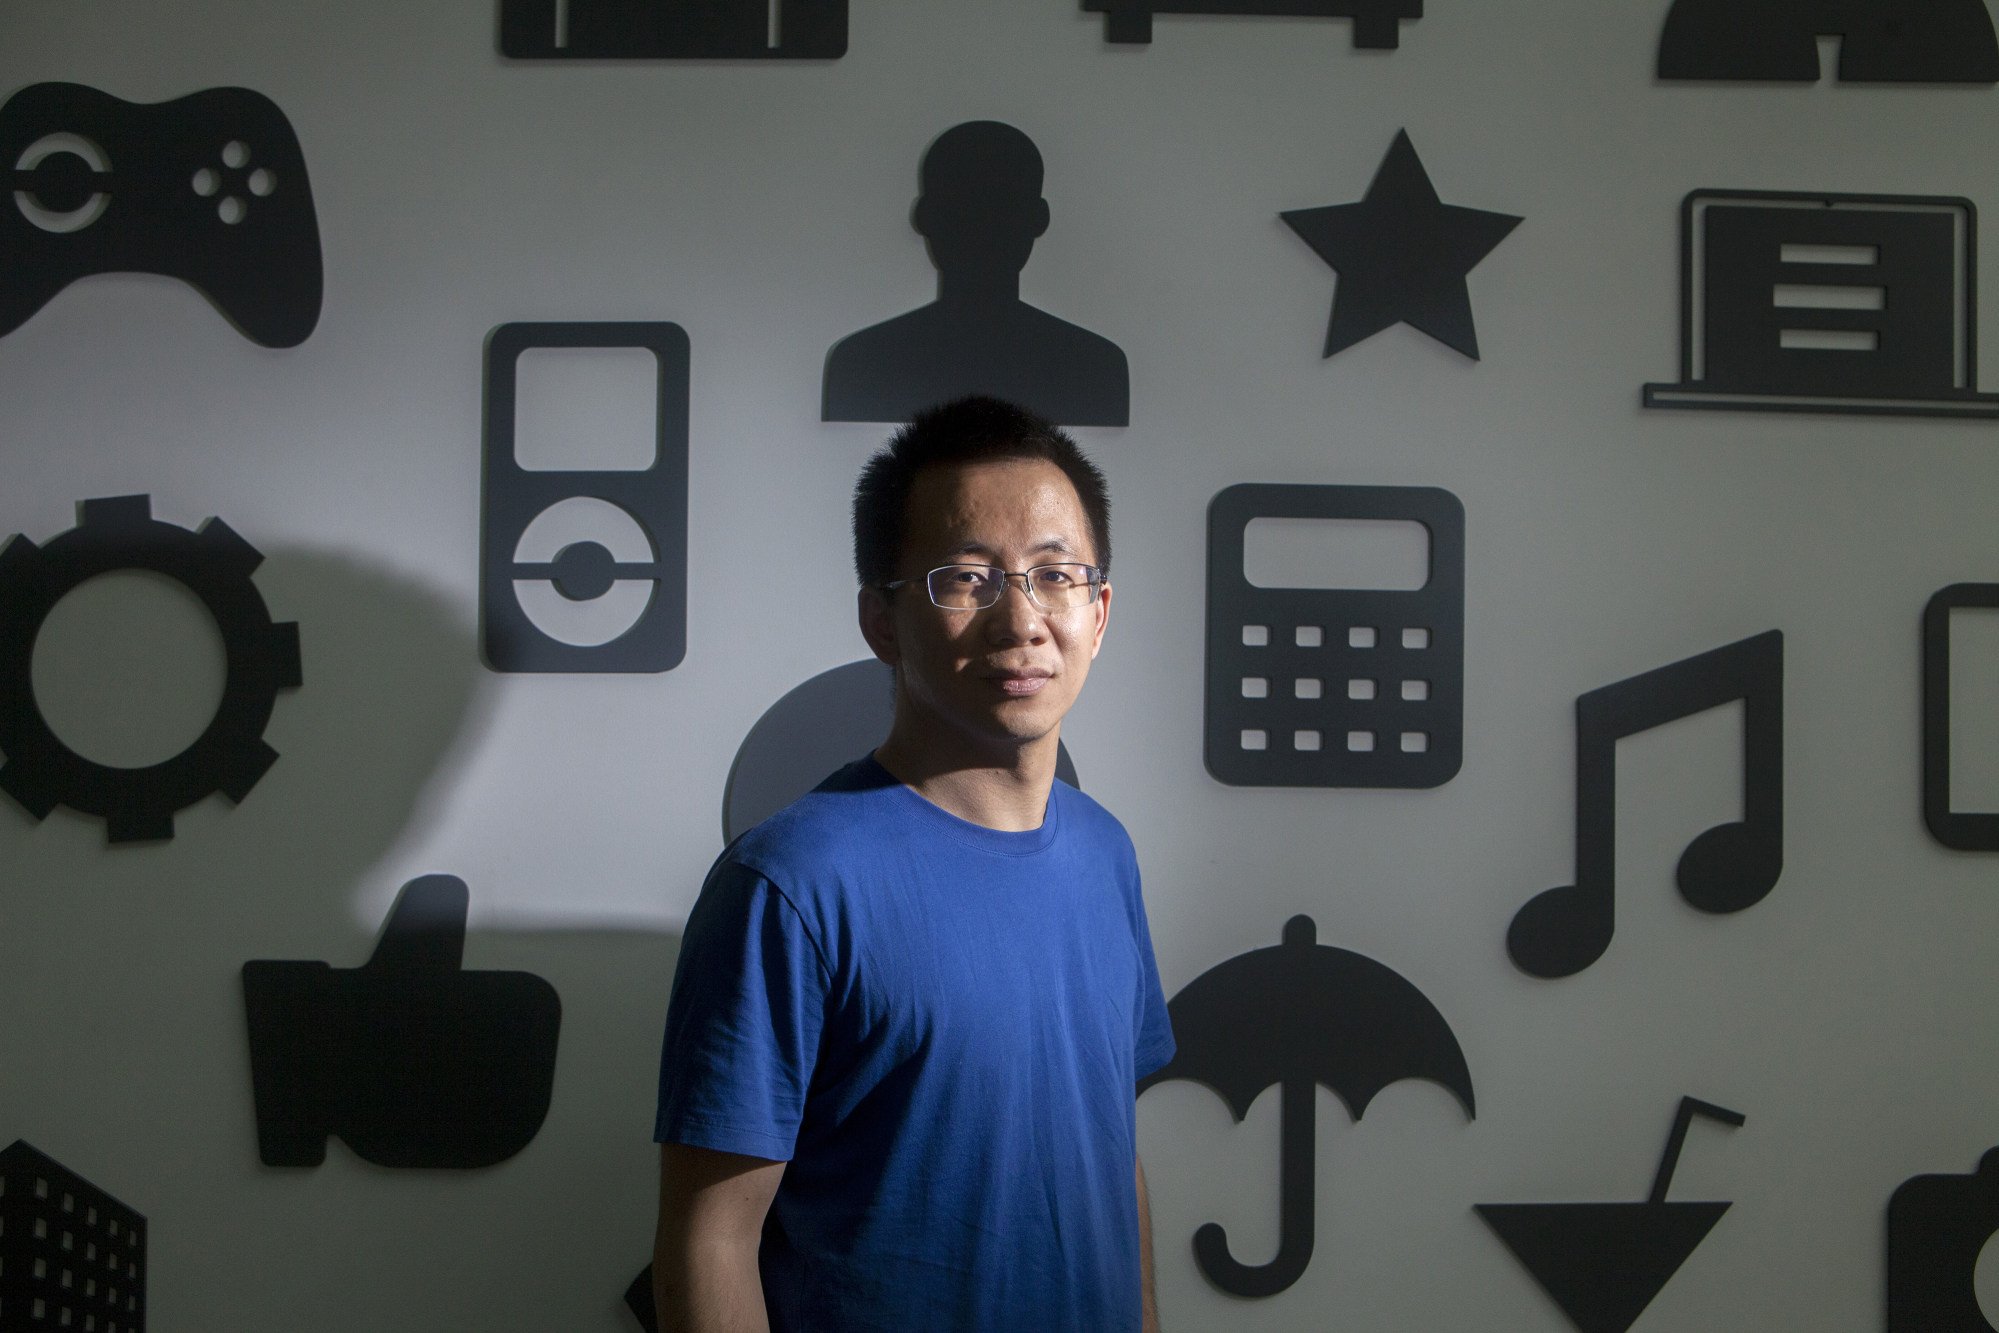 Zhang Yi-ming is the founder of ByteDance, the company behind TikTok. Photo: Handout